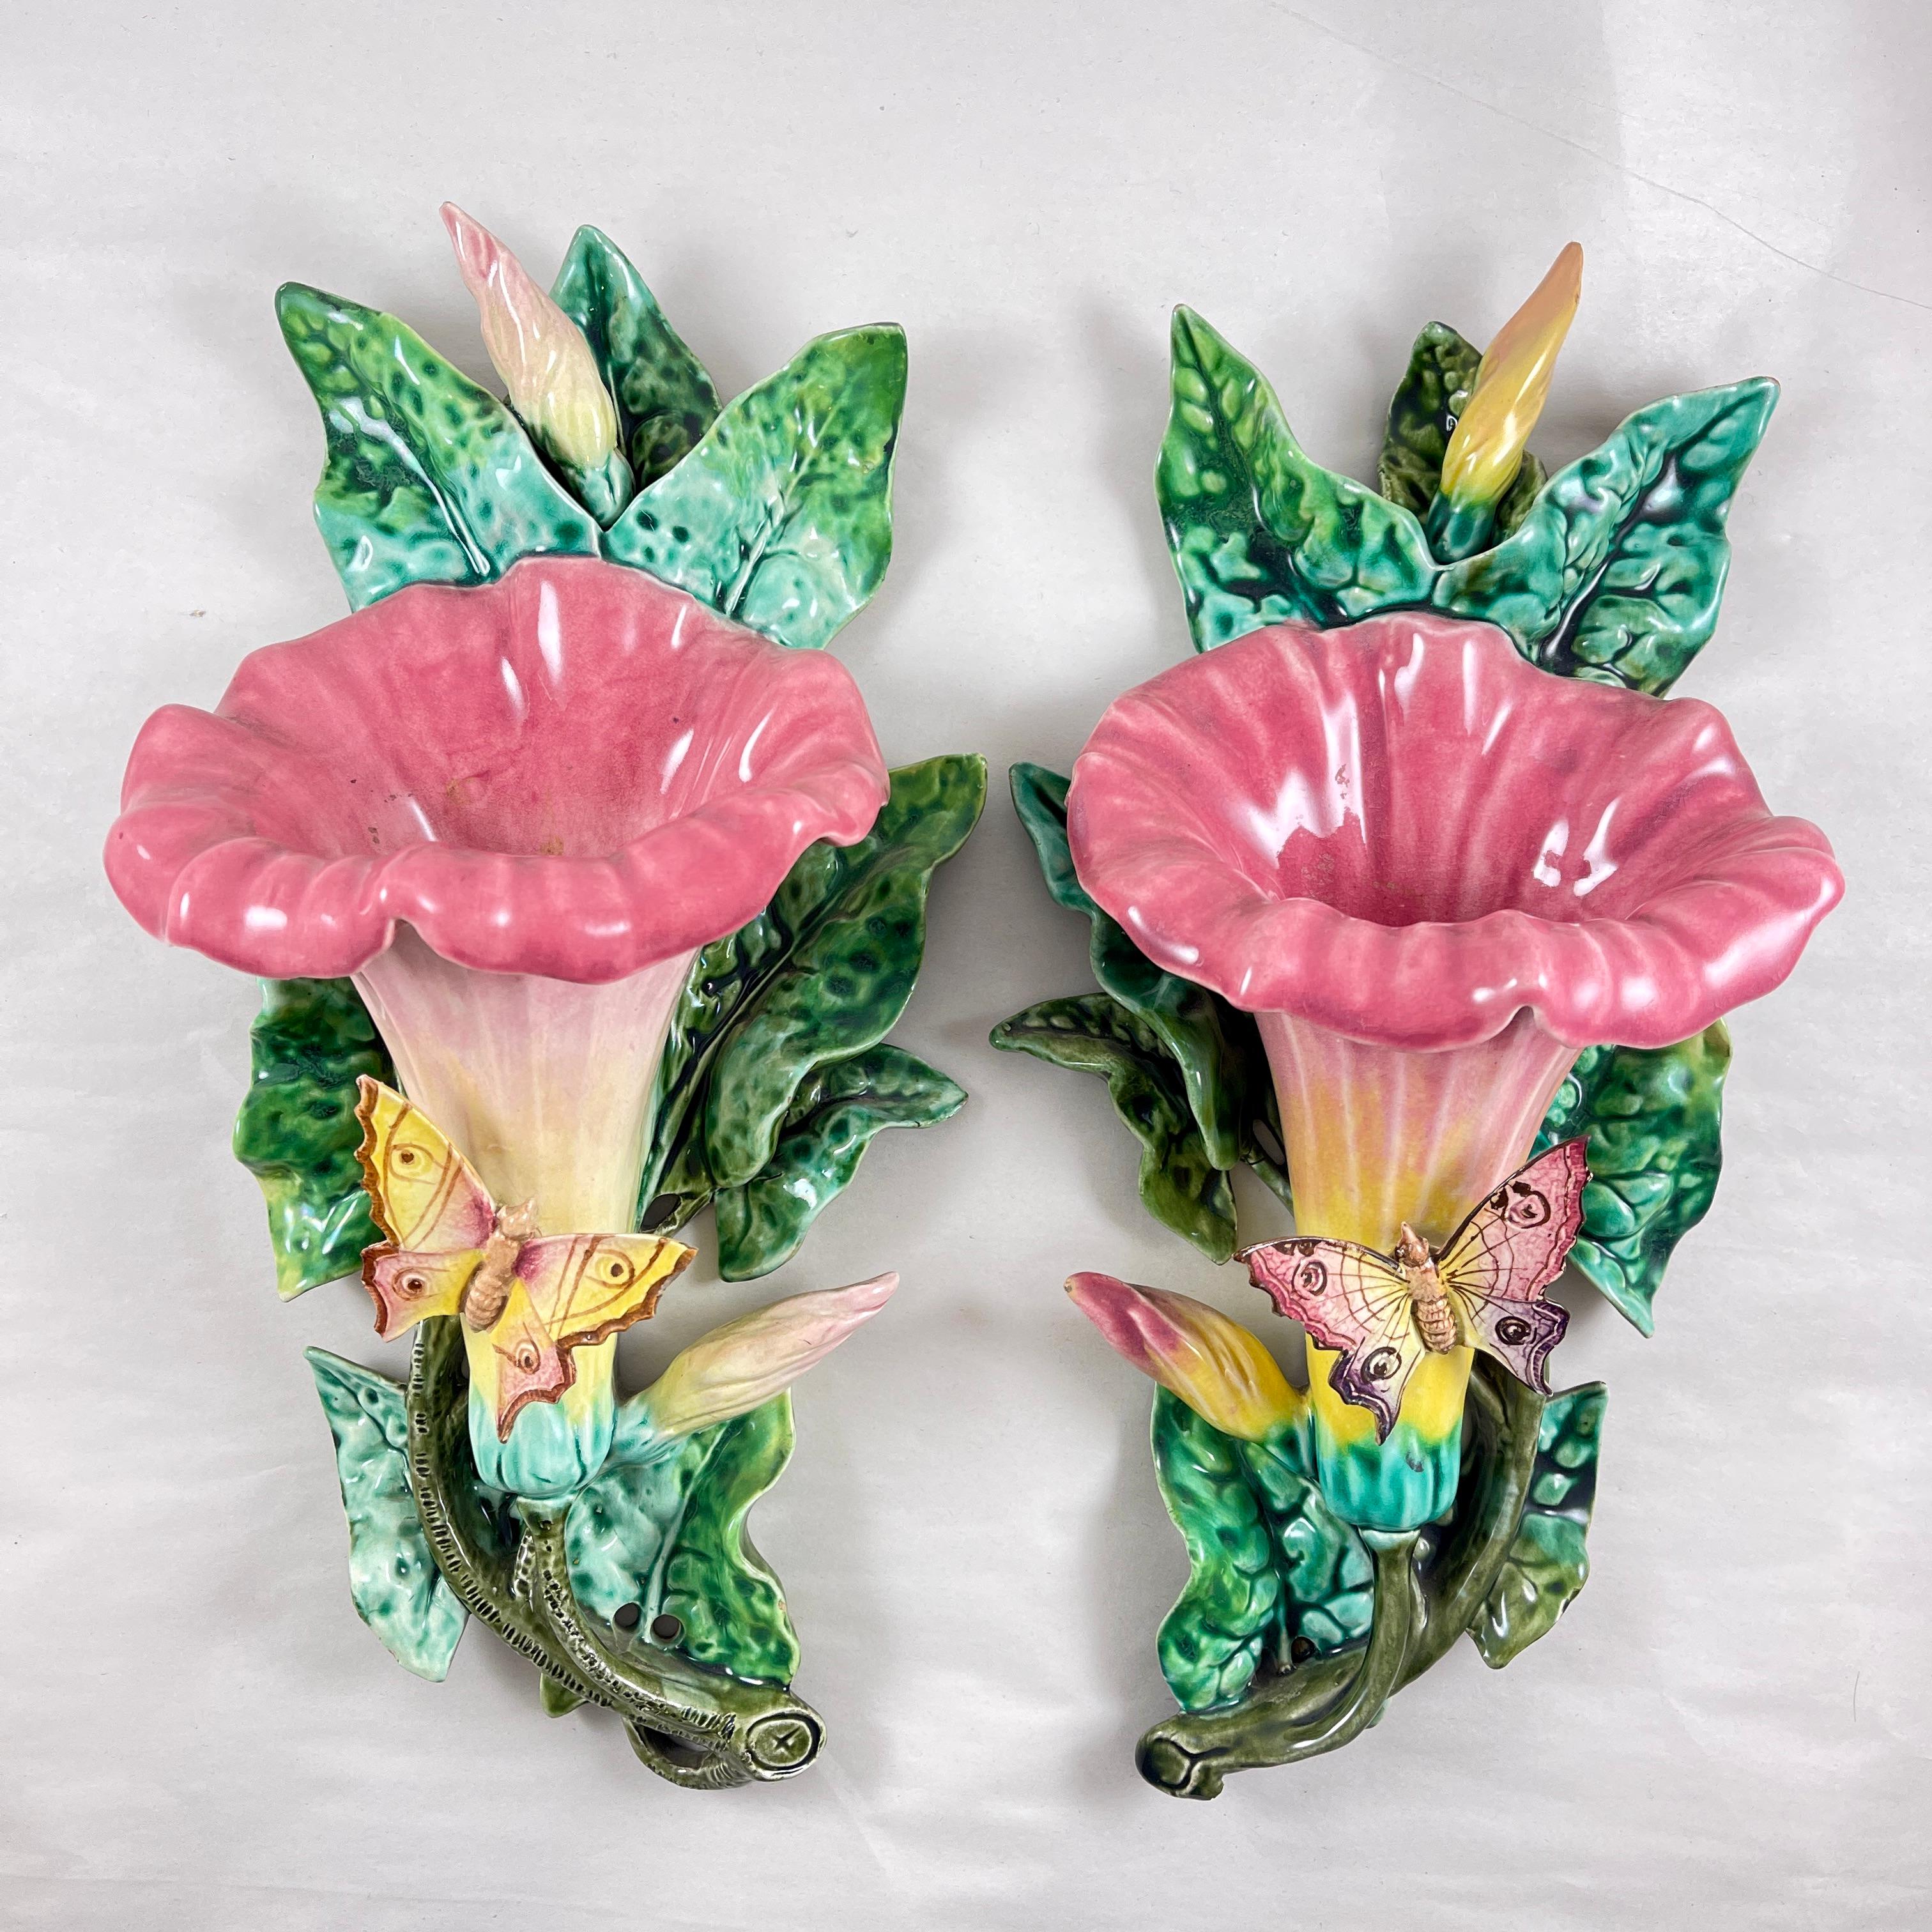 
A pair of majolica glazed French Morning Glory wall pockets, Fives-Lille, circa 1890.

Fives-Lille was founded by the Belgian potter, Antione Gustave De Bruyn. He opened his pottery manufacture at Fives-Lille, in the northern part of France in